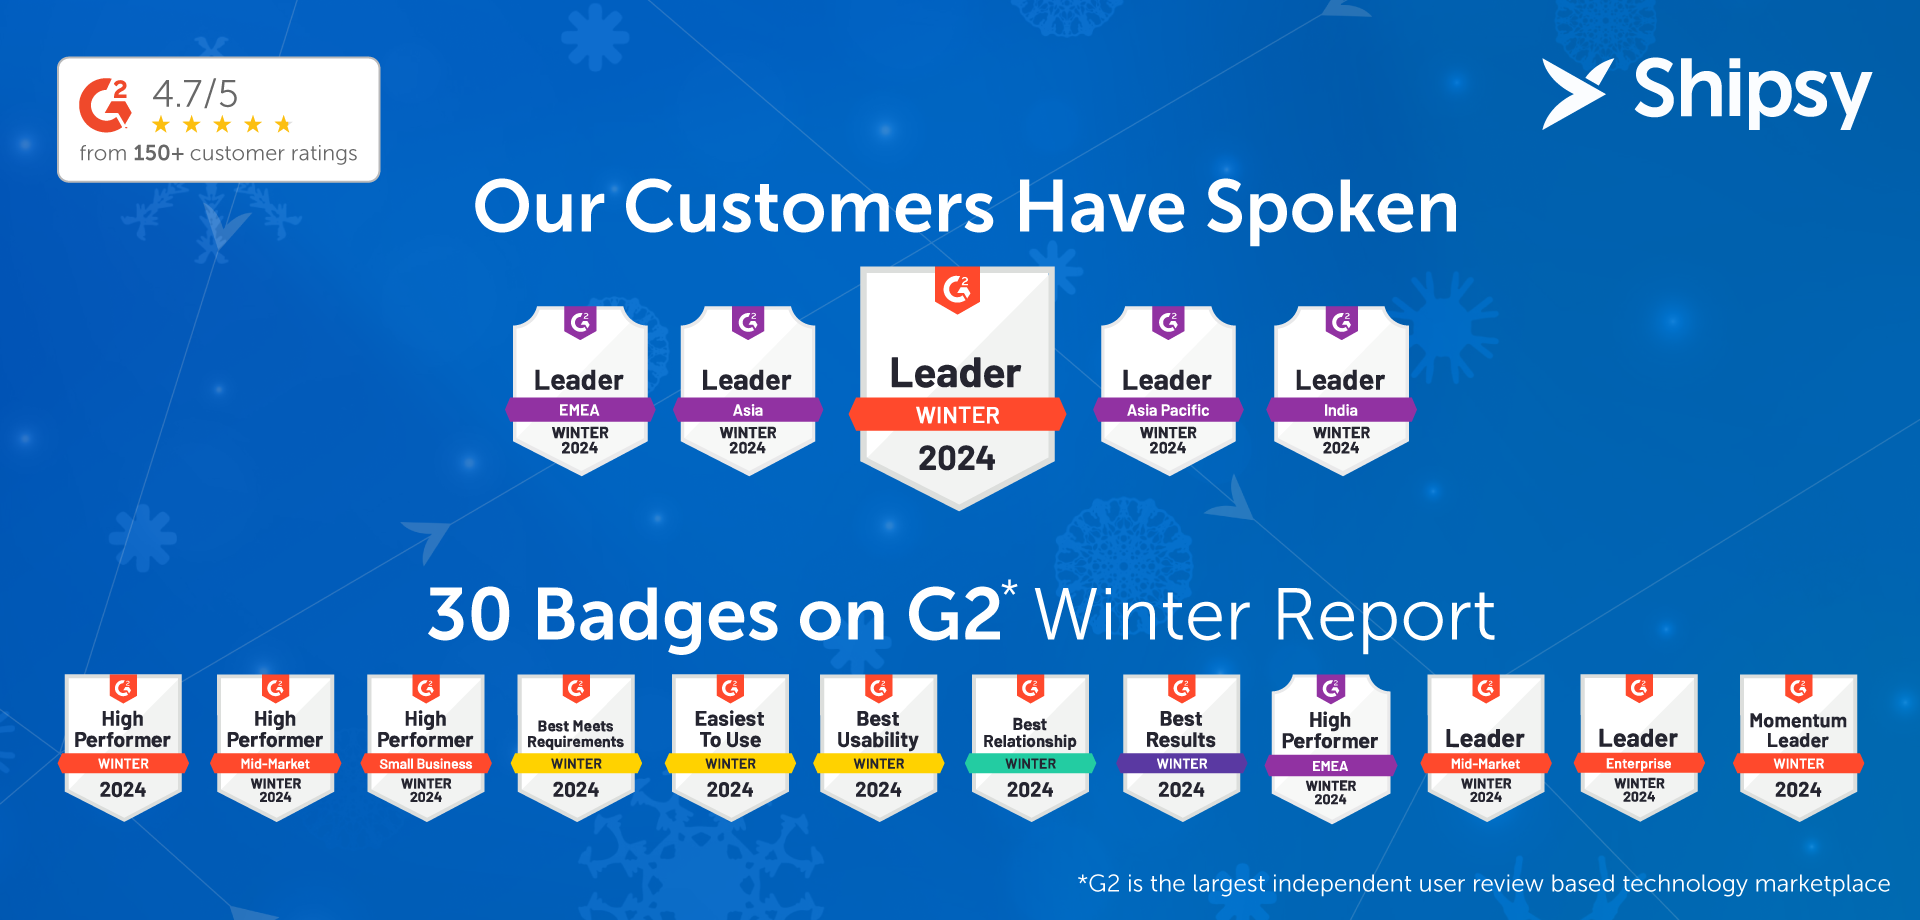 Shipsy Honored with 30 Badges Among Many Other Recognitions by its Customers on G2’s Winter 2024 Reports